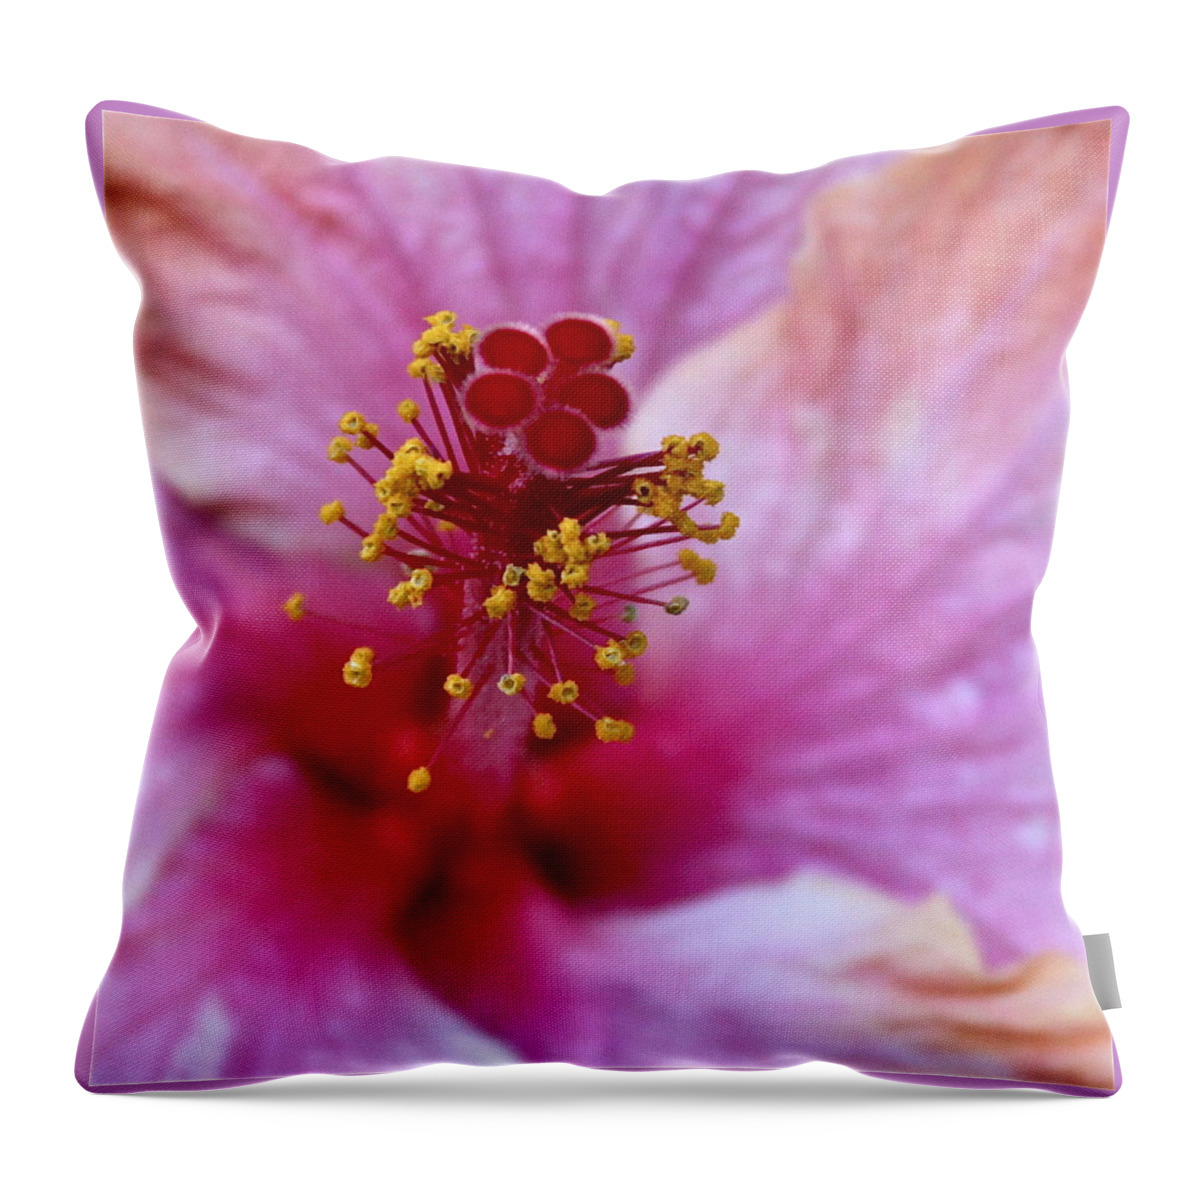 Inflorescence Throw Pillow featuring the photograph Pink Inflorescence Hibiscus Floret by Karon Melillo DeVega